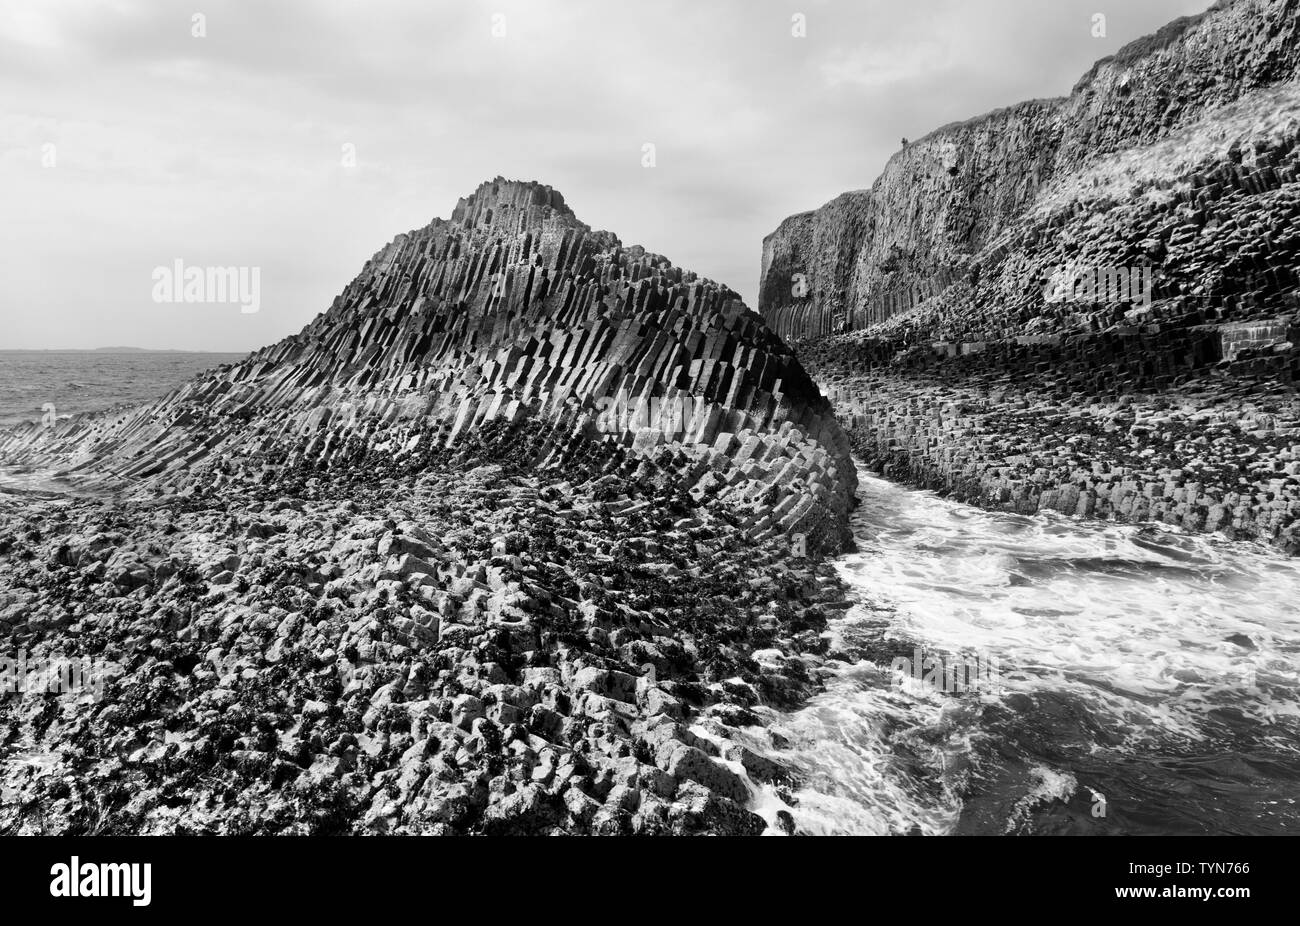 Contorted basalt columns on the Isle of Staffa near landing jetty Fingal's Cave, one of the Inner Hebrides group of islands off Scotland's west coast. Stock Photo